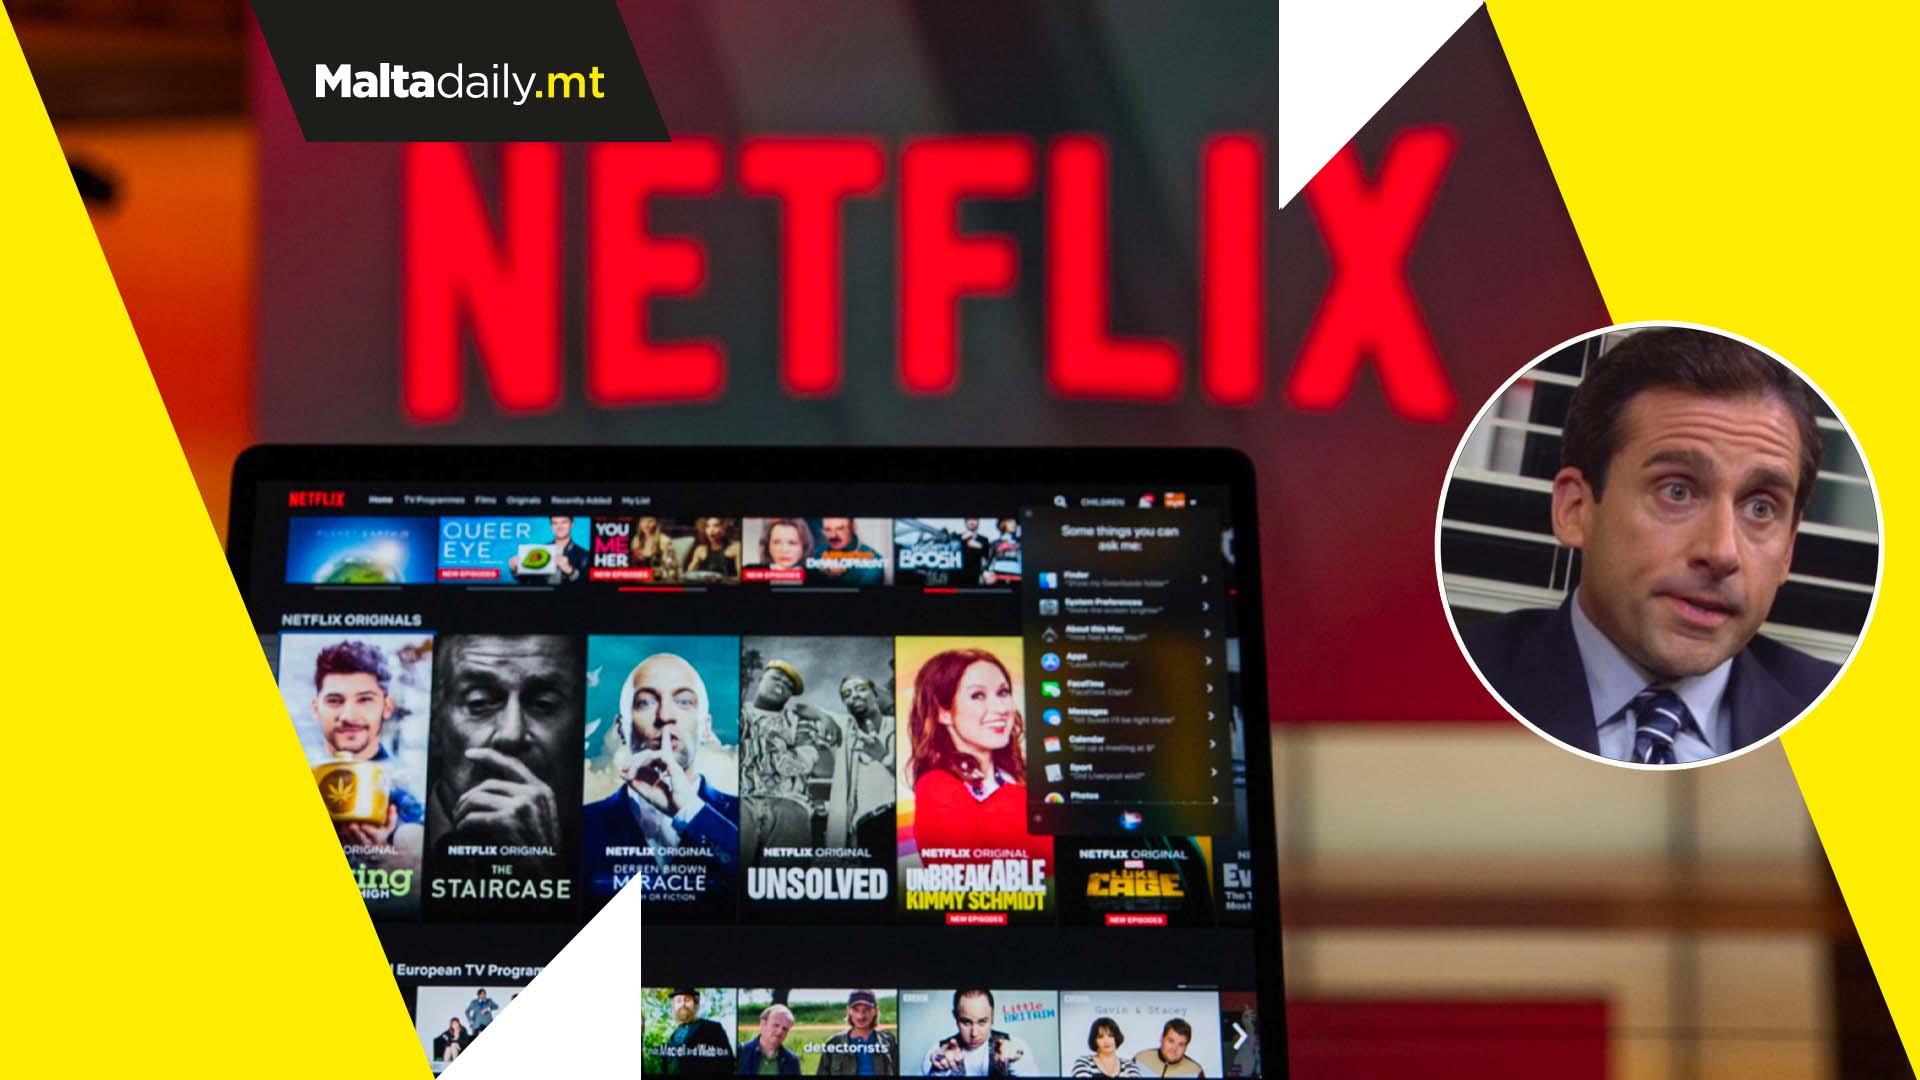 Netflix adverts will be starting in the coming weeks as price plans change